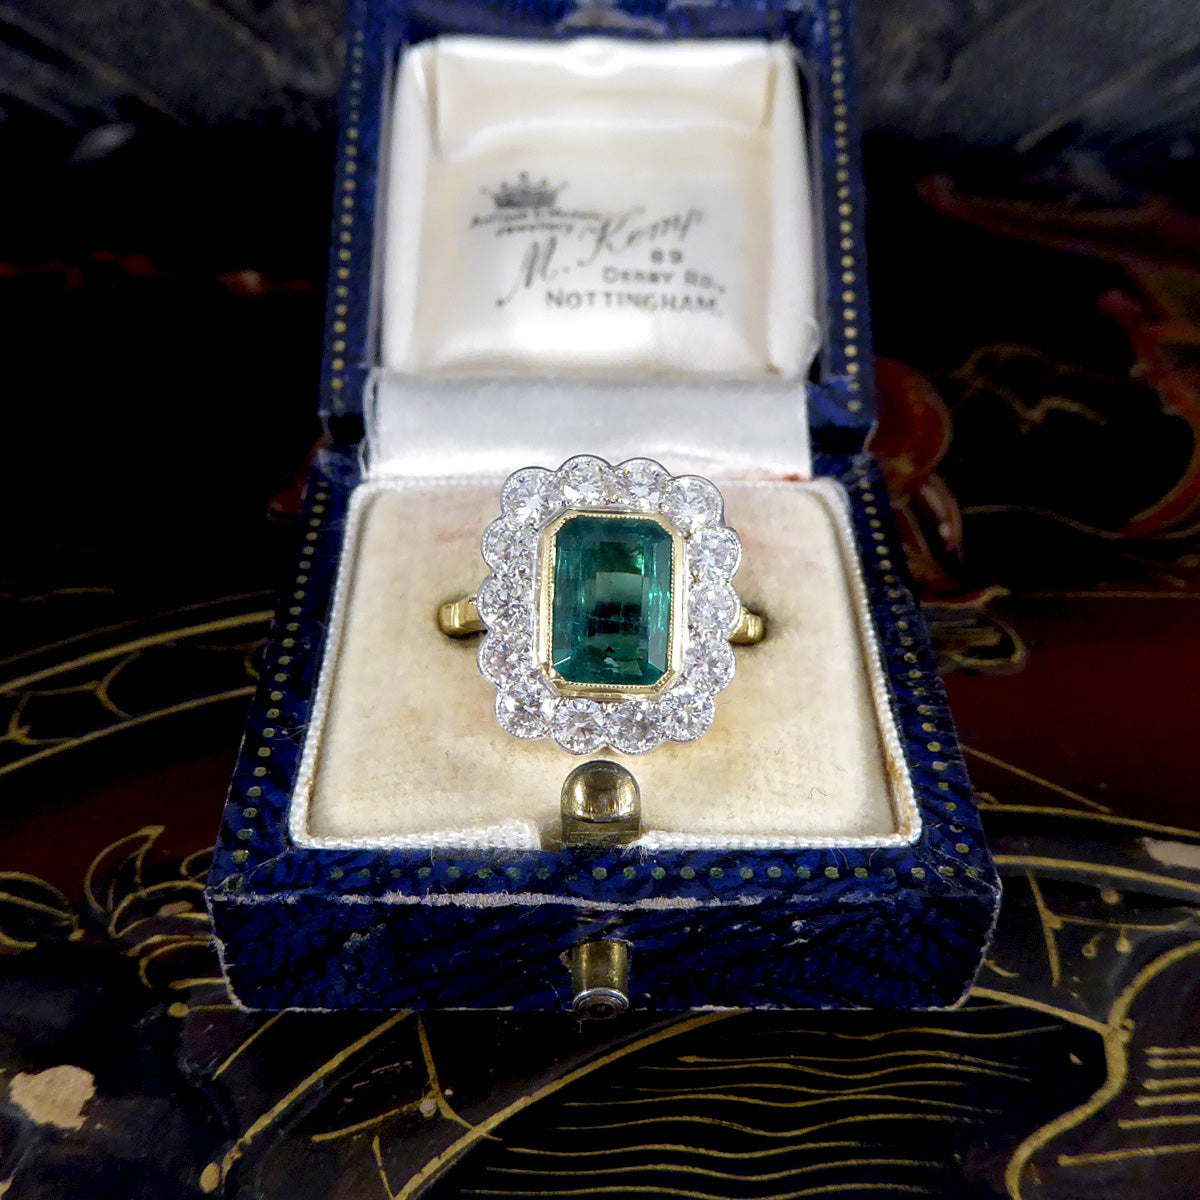 Contemporary Edwardian Style 2.50ct Emerald and 1.20ct Diamond Cluster Ring in 18ct Gold